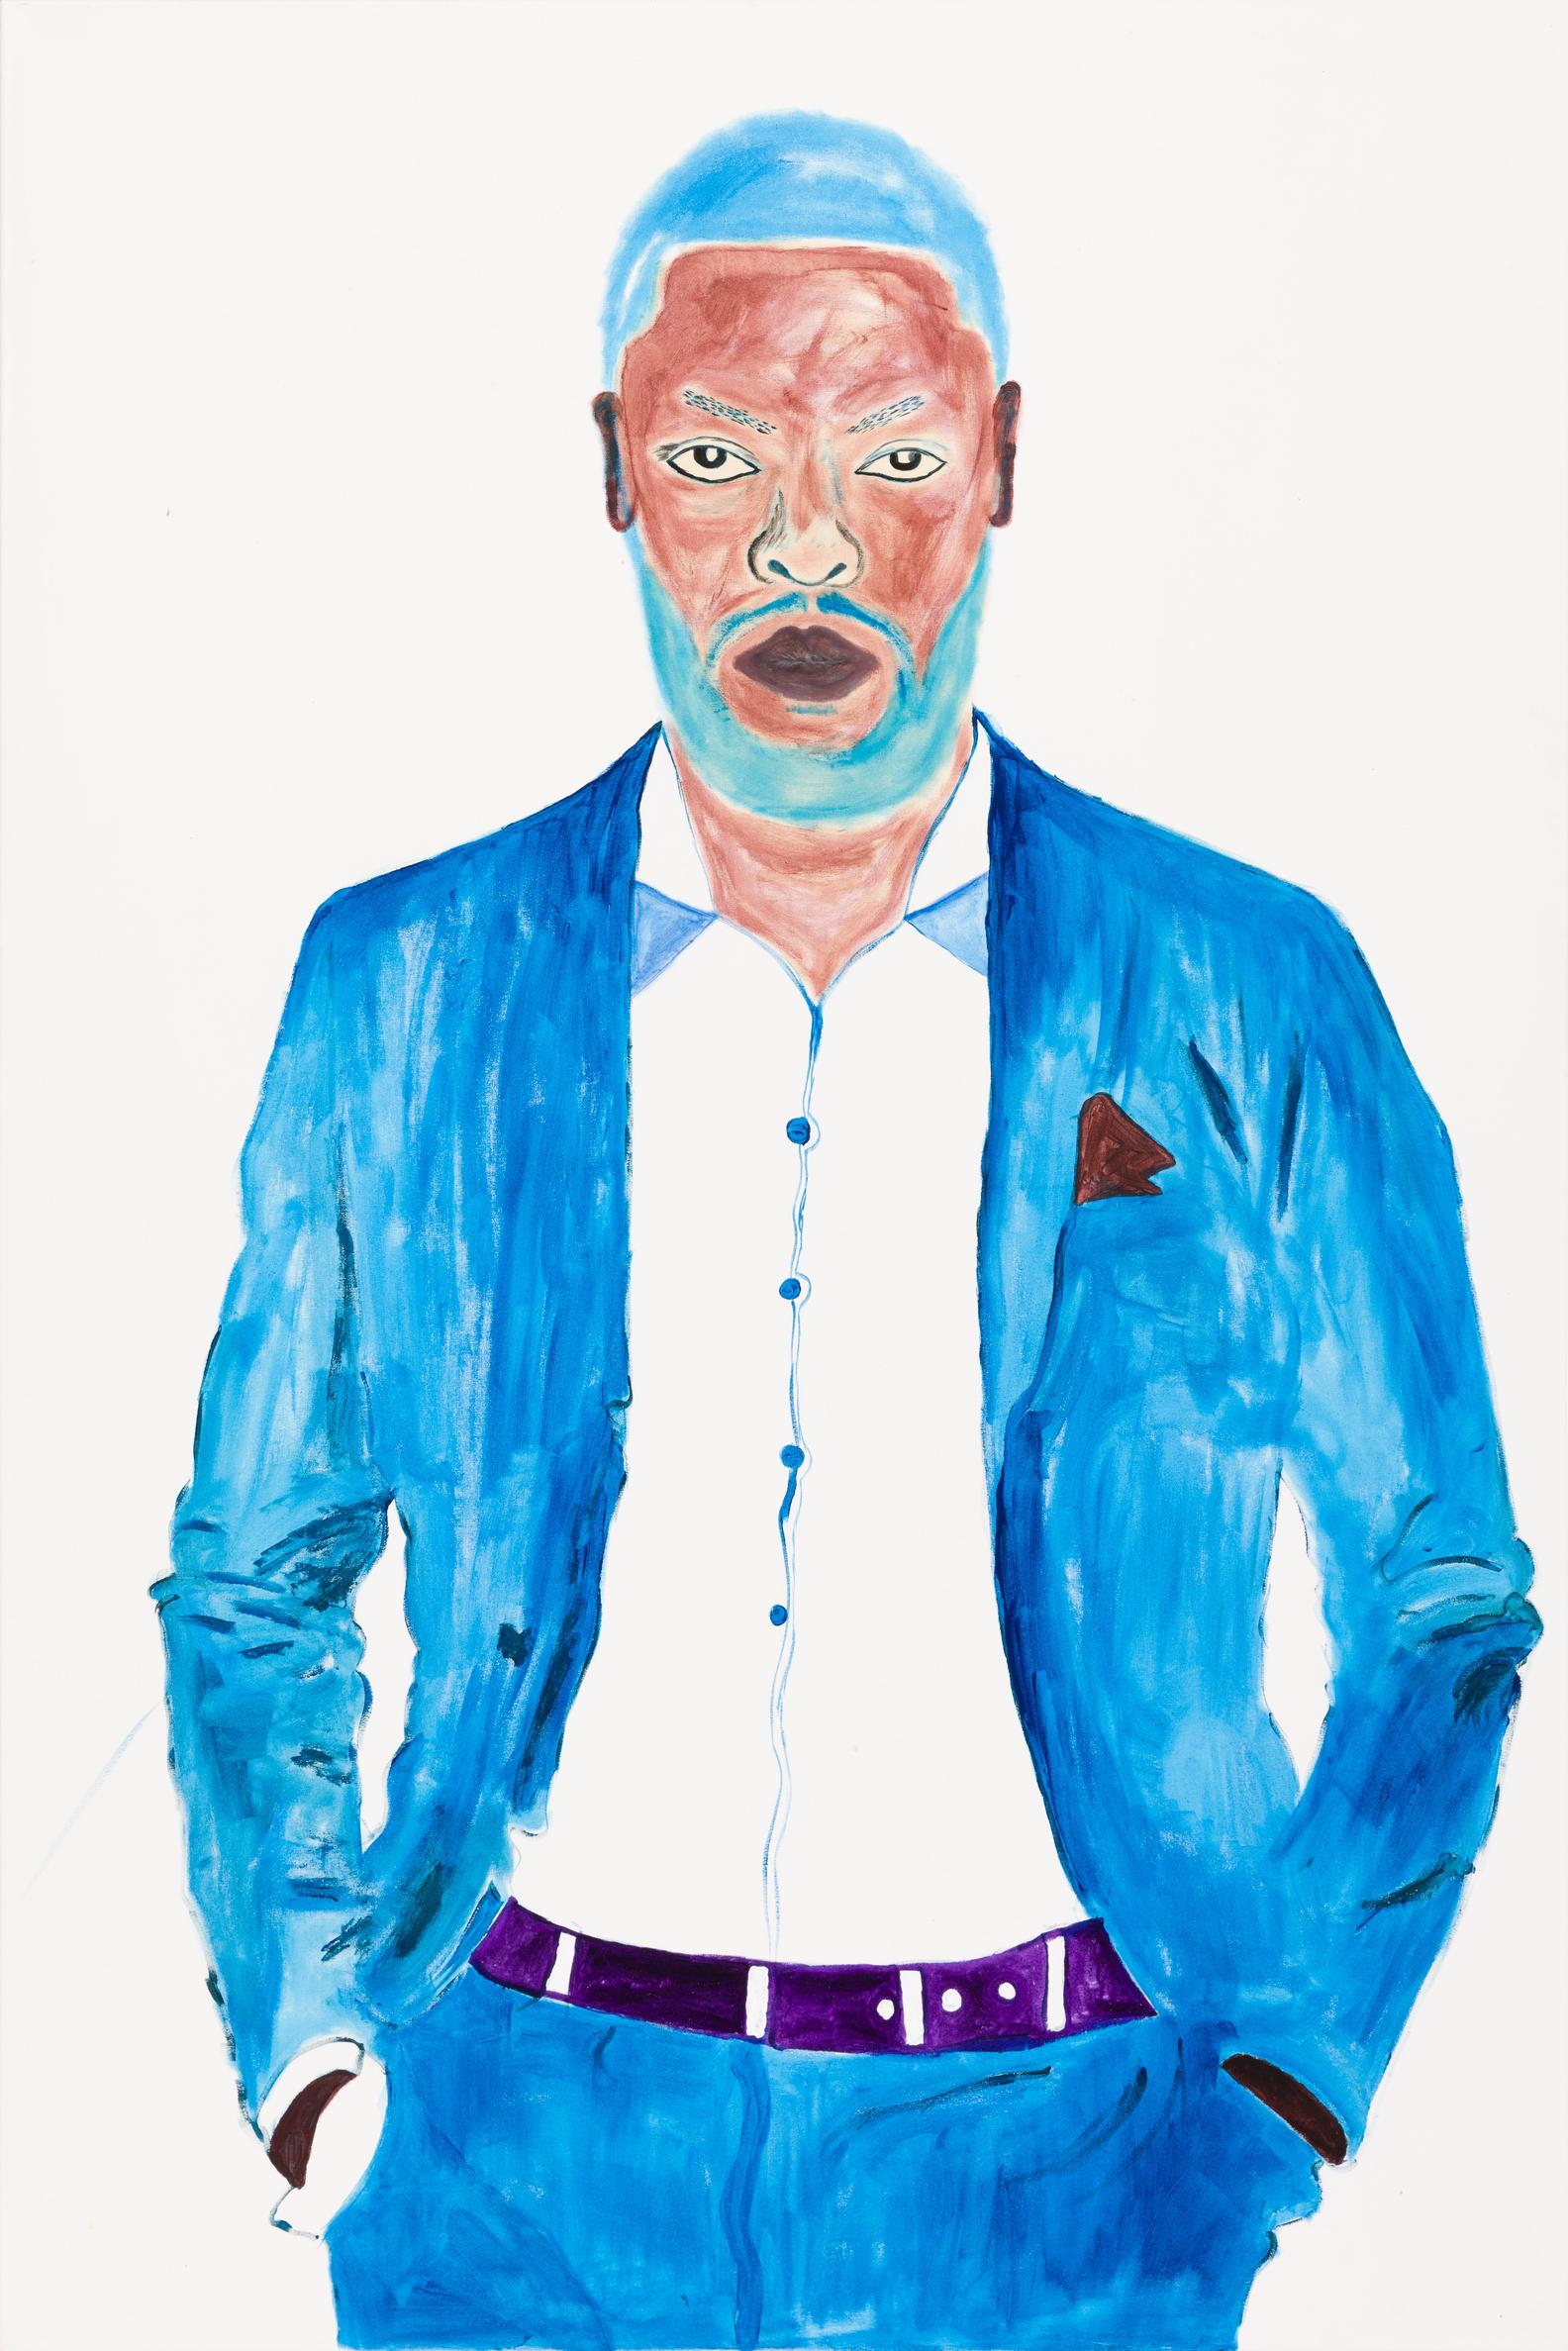 A painting of a person in a blue suit with their hands in their pockets.